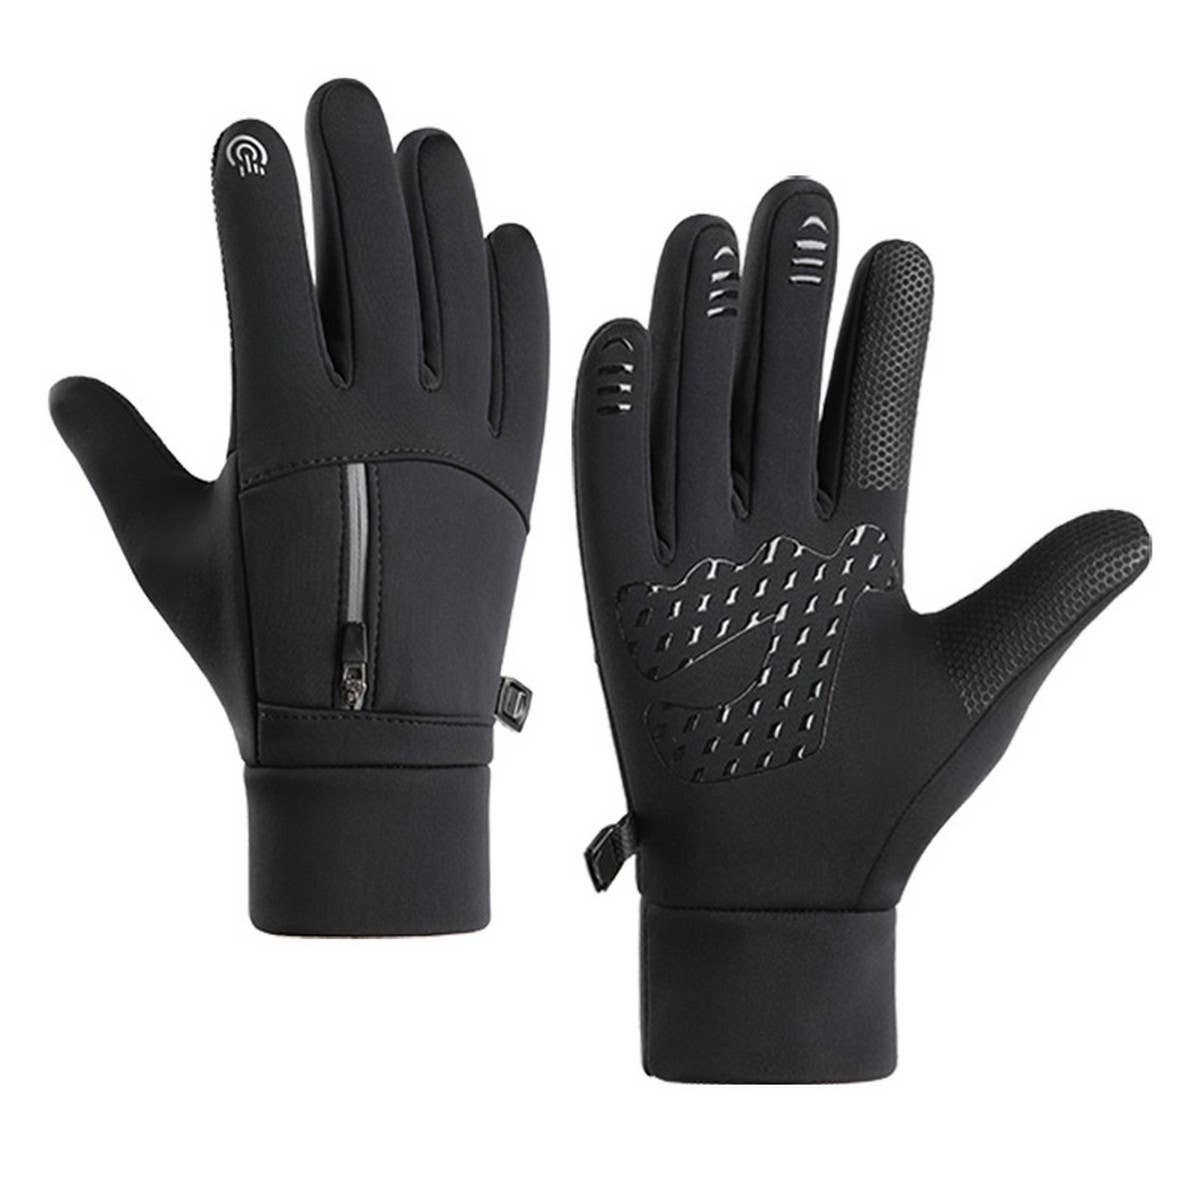 WINTER OUTDOOR TOUCH SCREEN WATERPROOF GLOVES_CWAG0043